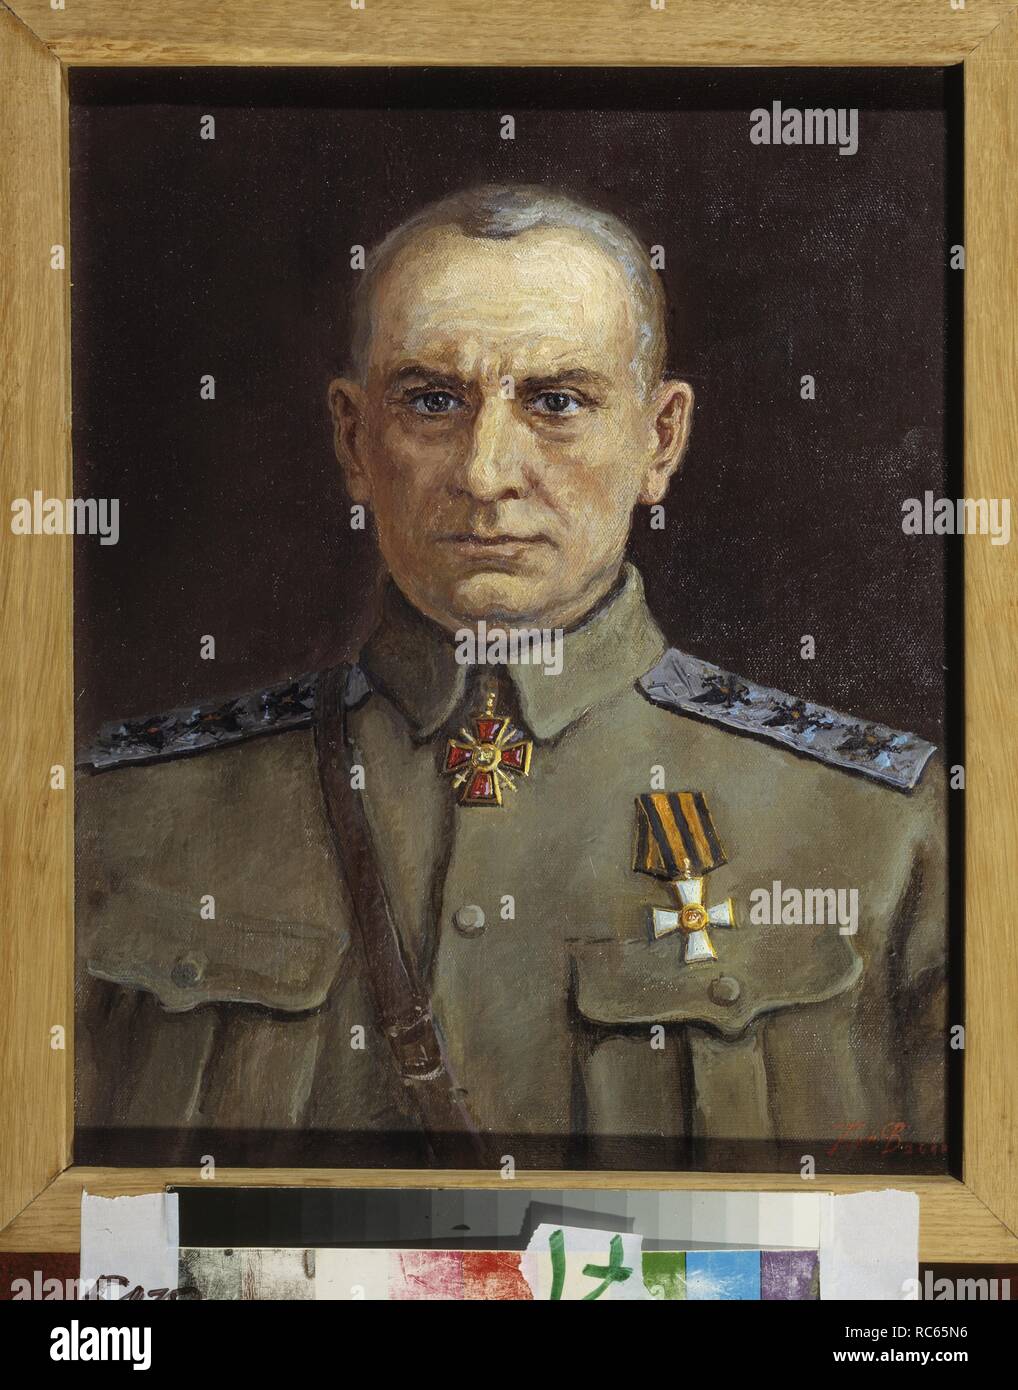 Portrait of the Supreme Ruler of the White Army in Siberia Admiral Alexander Kolchak (1874-1920). Museum: State Central Navy Museum, St. Petersburg. Author: Pen, Sergei Varlenovich. Stock Photo